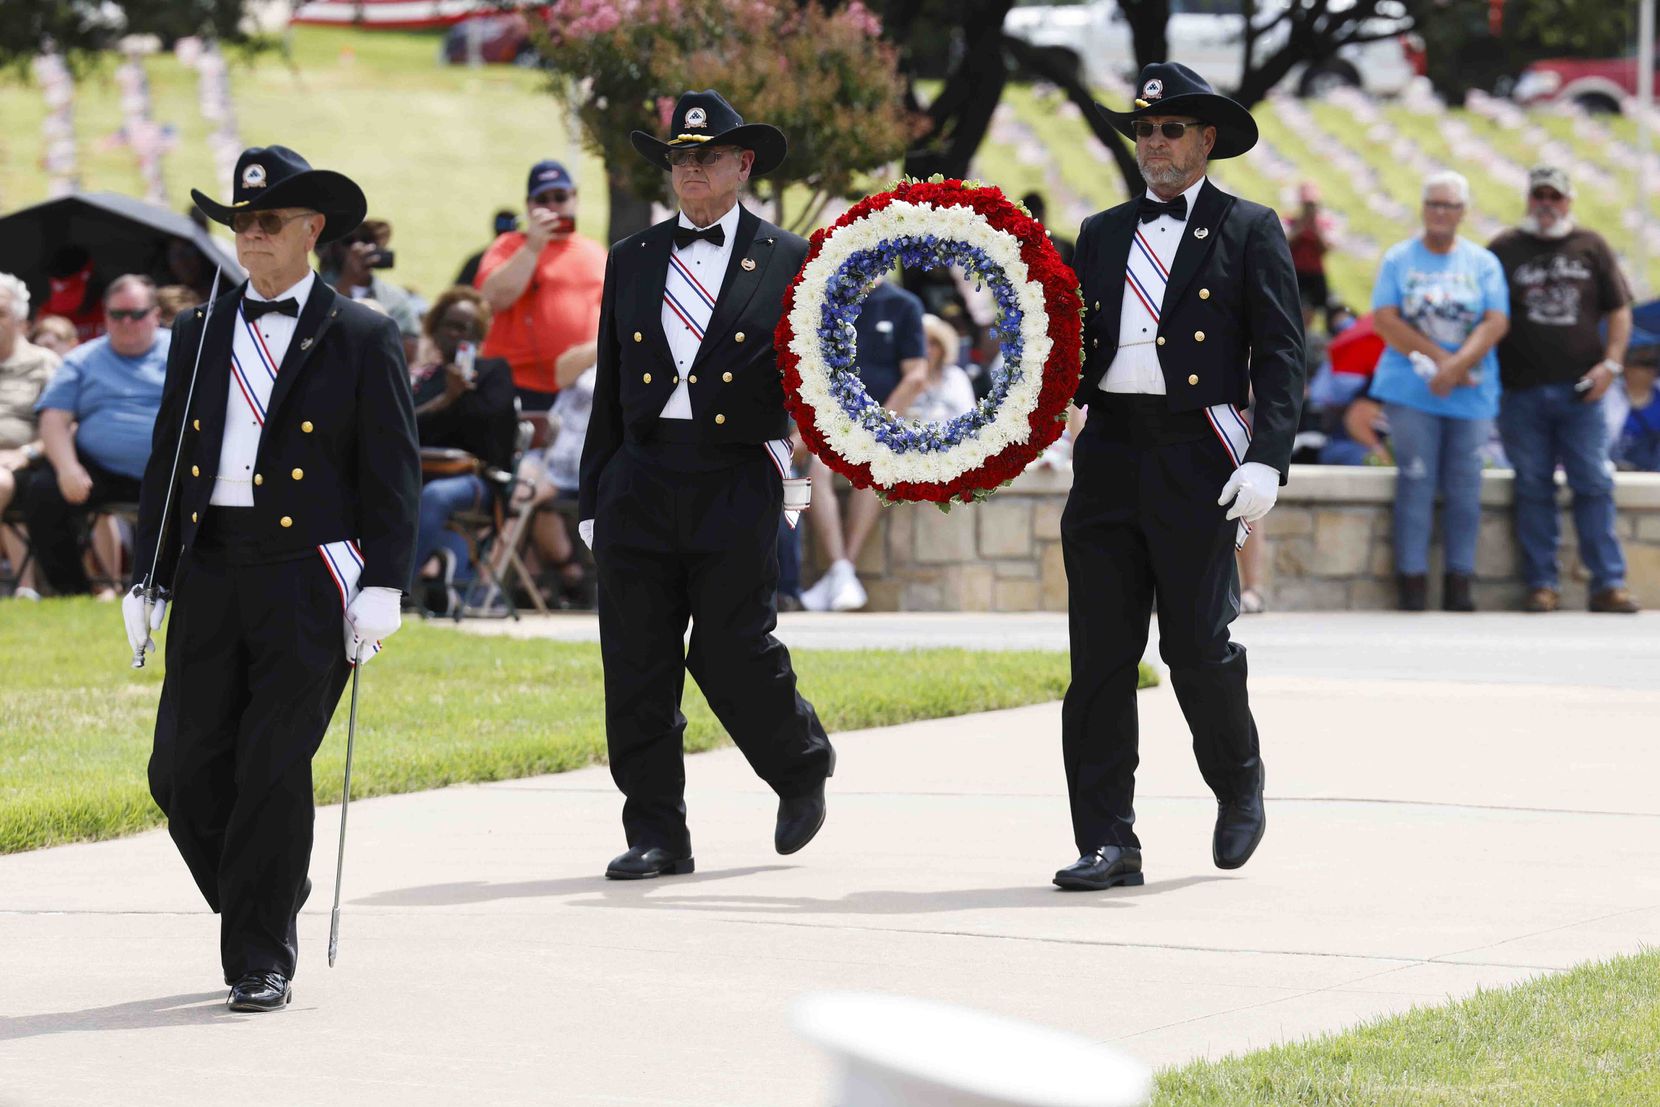 Members of the Texas National Cemetery Foundation Ceremonial Guard made their way to the...